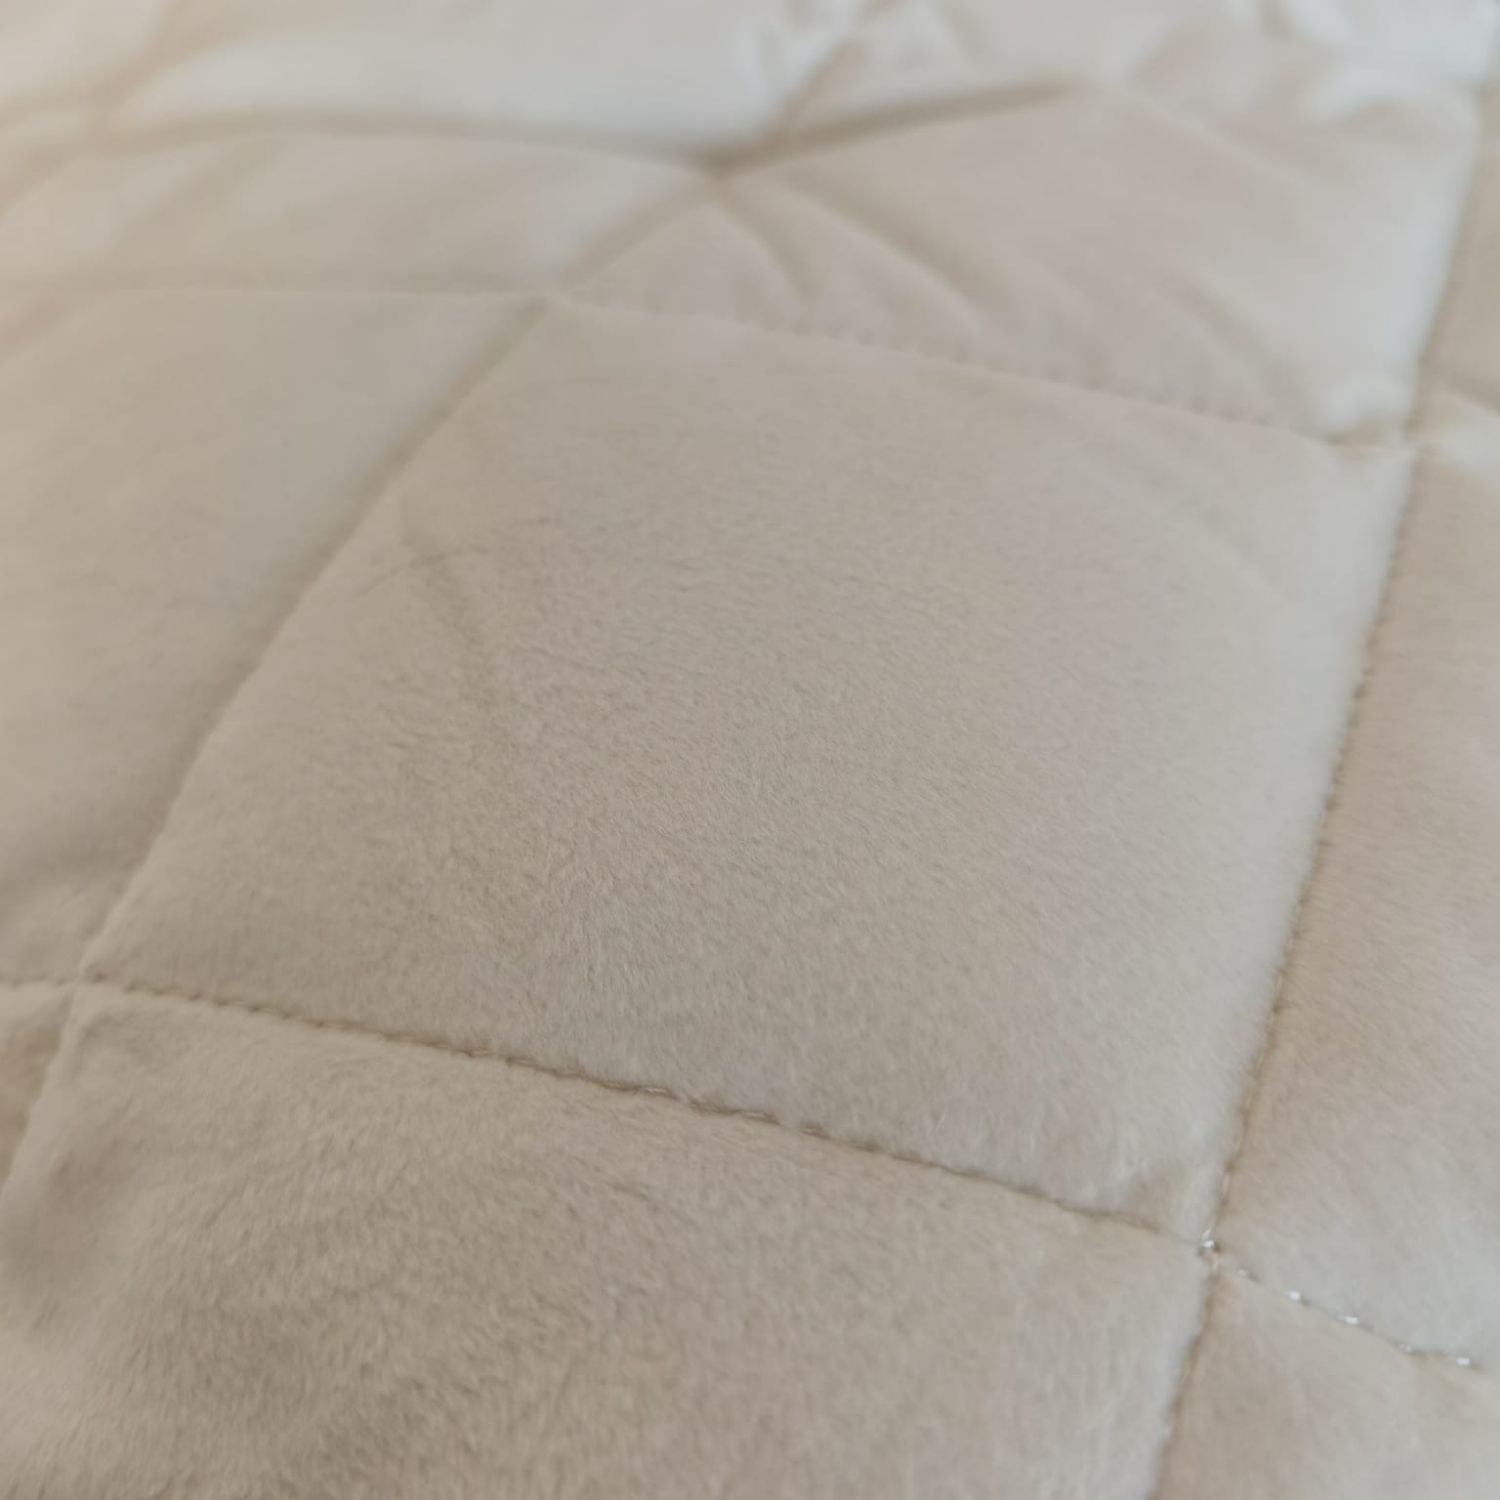 The Home Bedroom Fleece Mattress Protector - White - Single Size 4 Shaws Department Stores